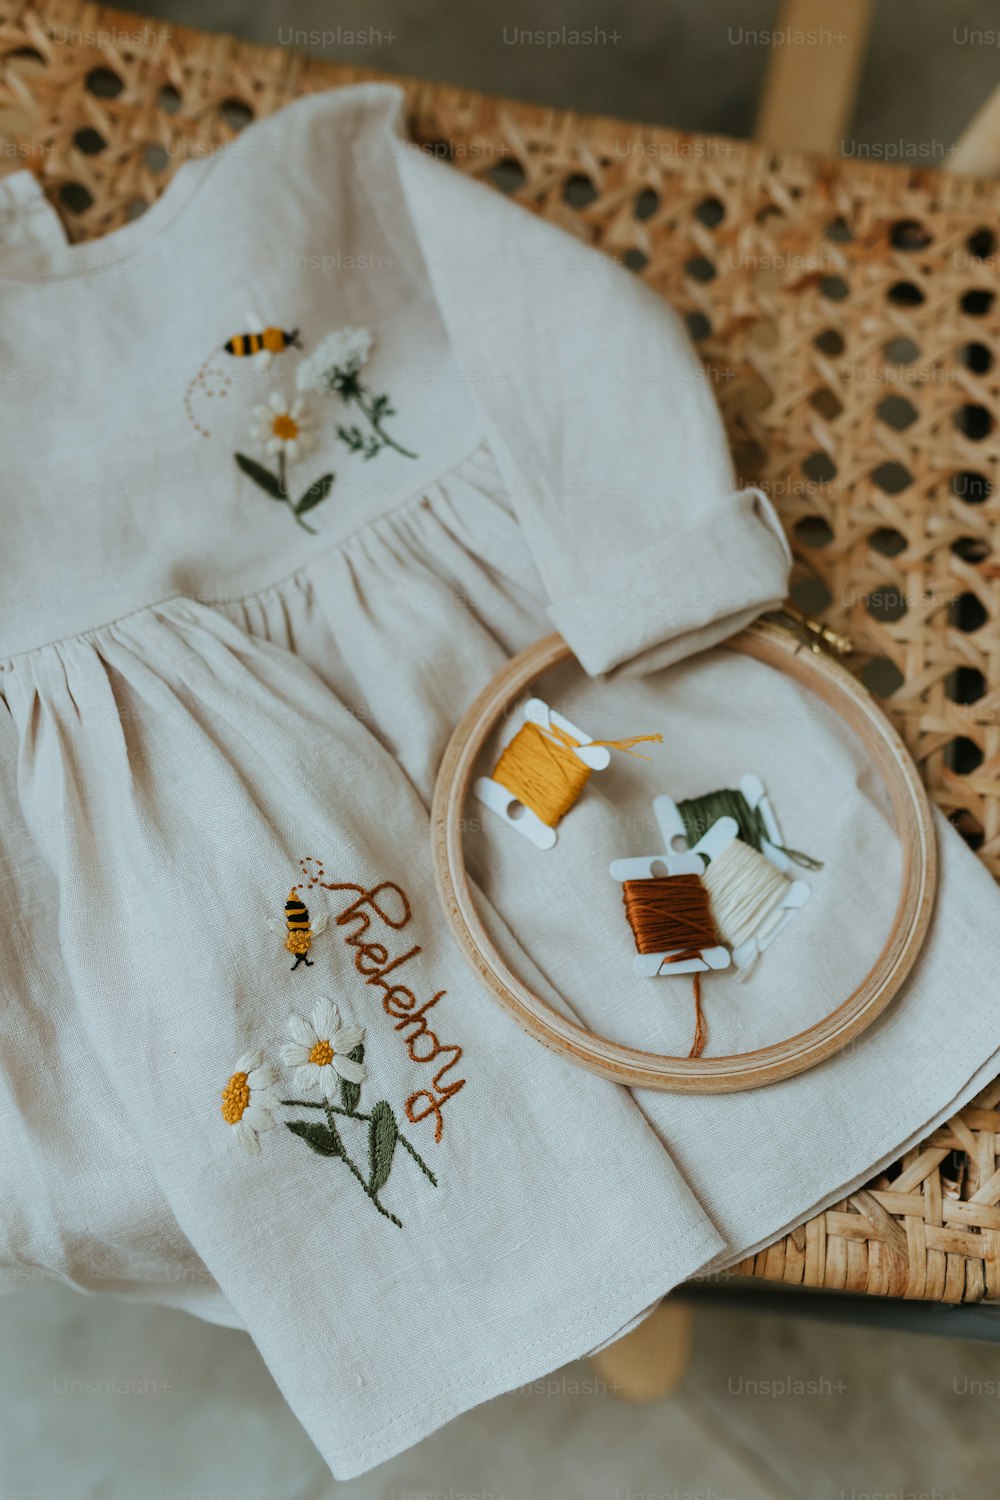 a baby's dress and a cross stitch kit sitting on a wicker chair